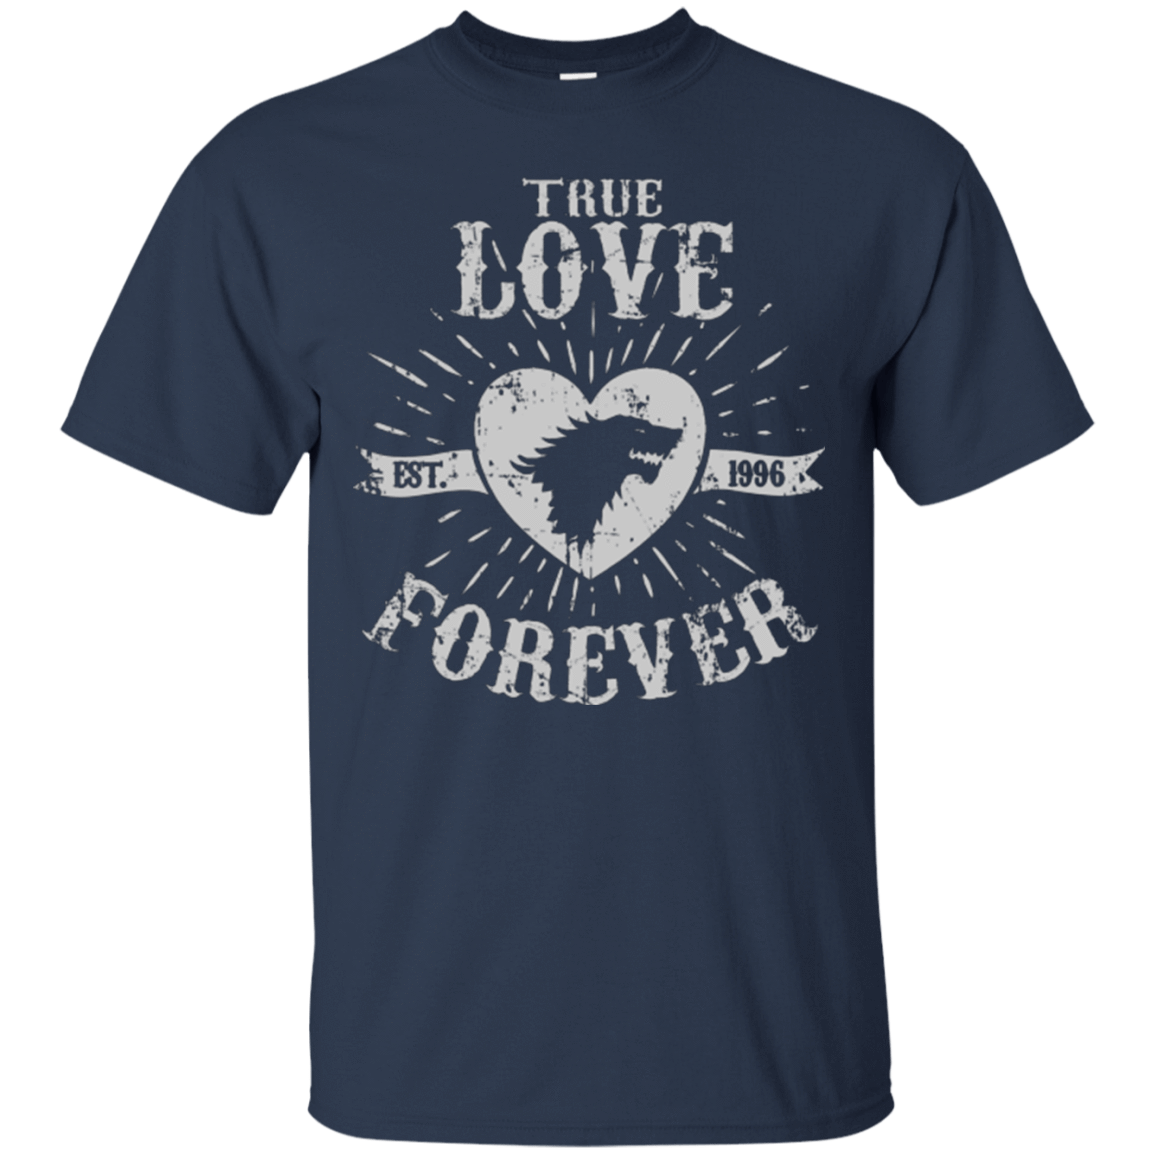 T-Shirts Navy / Small True Love Forever Wolf T-Shirt